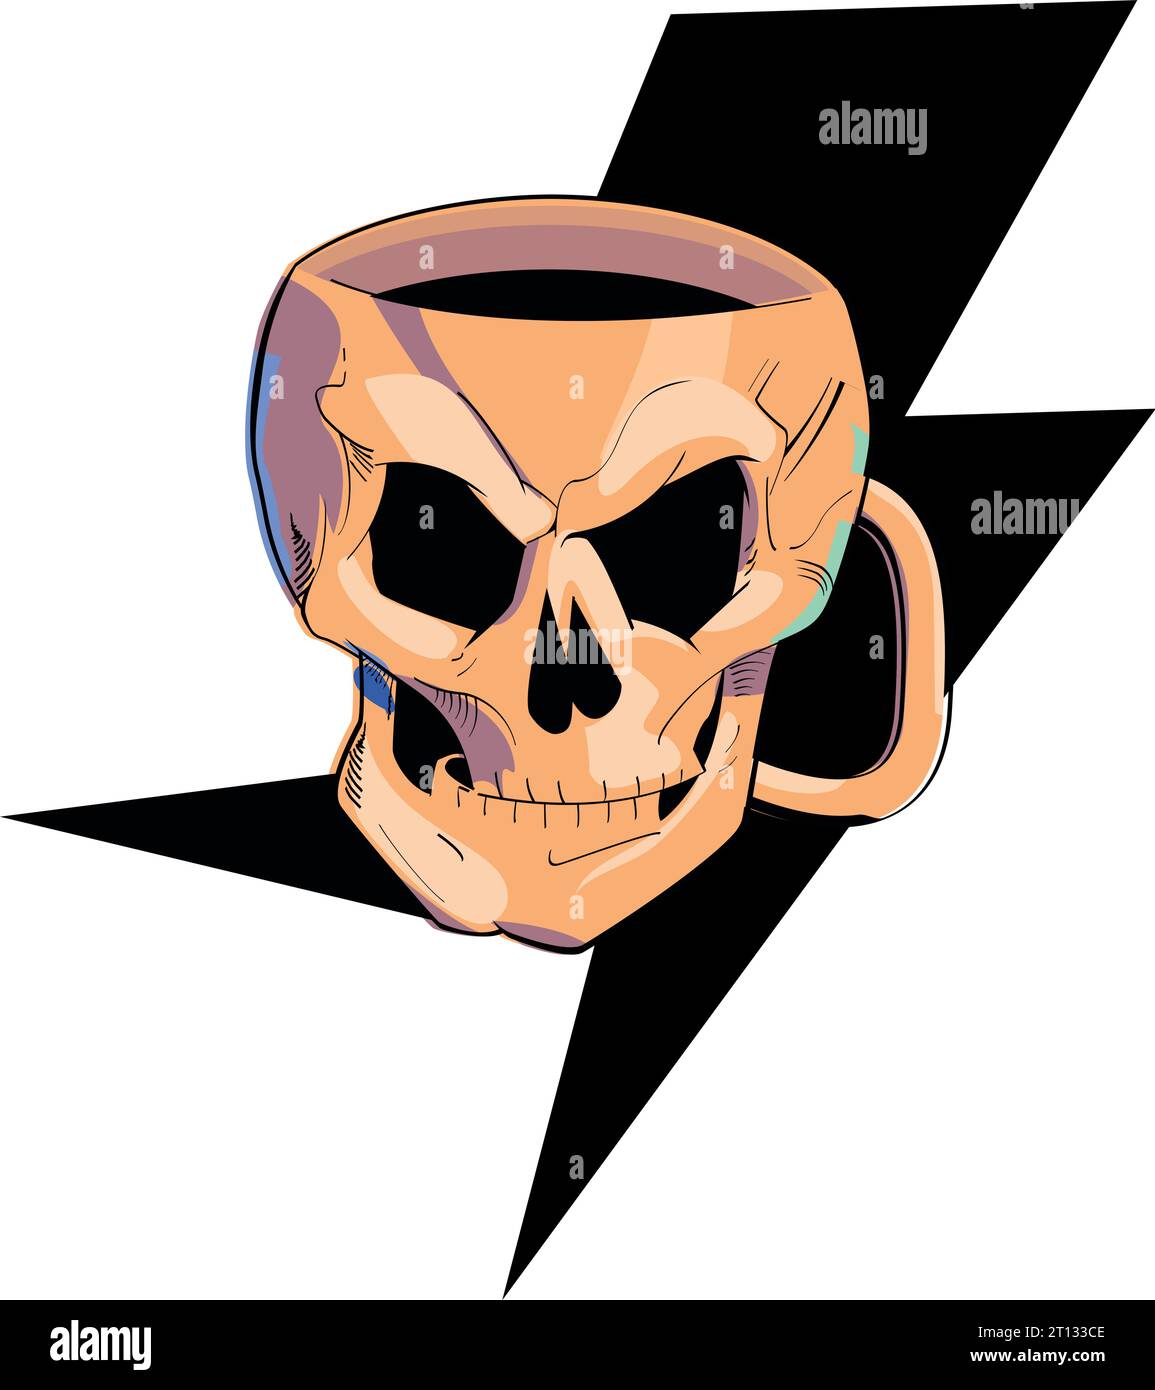 Design for a mug t-shirt with the shape of a skull and the symbol of thunderbolt. Good illustration for alcoholism. Stock Vector